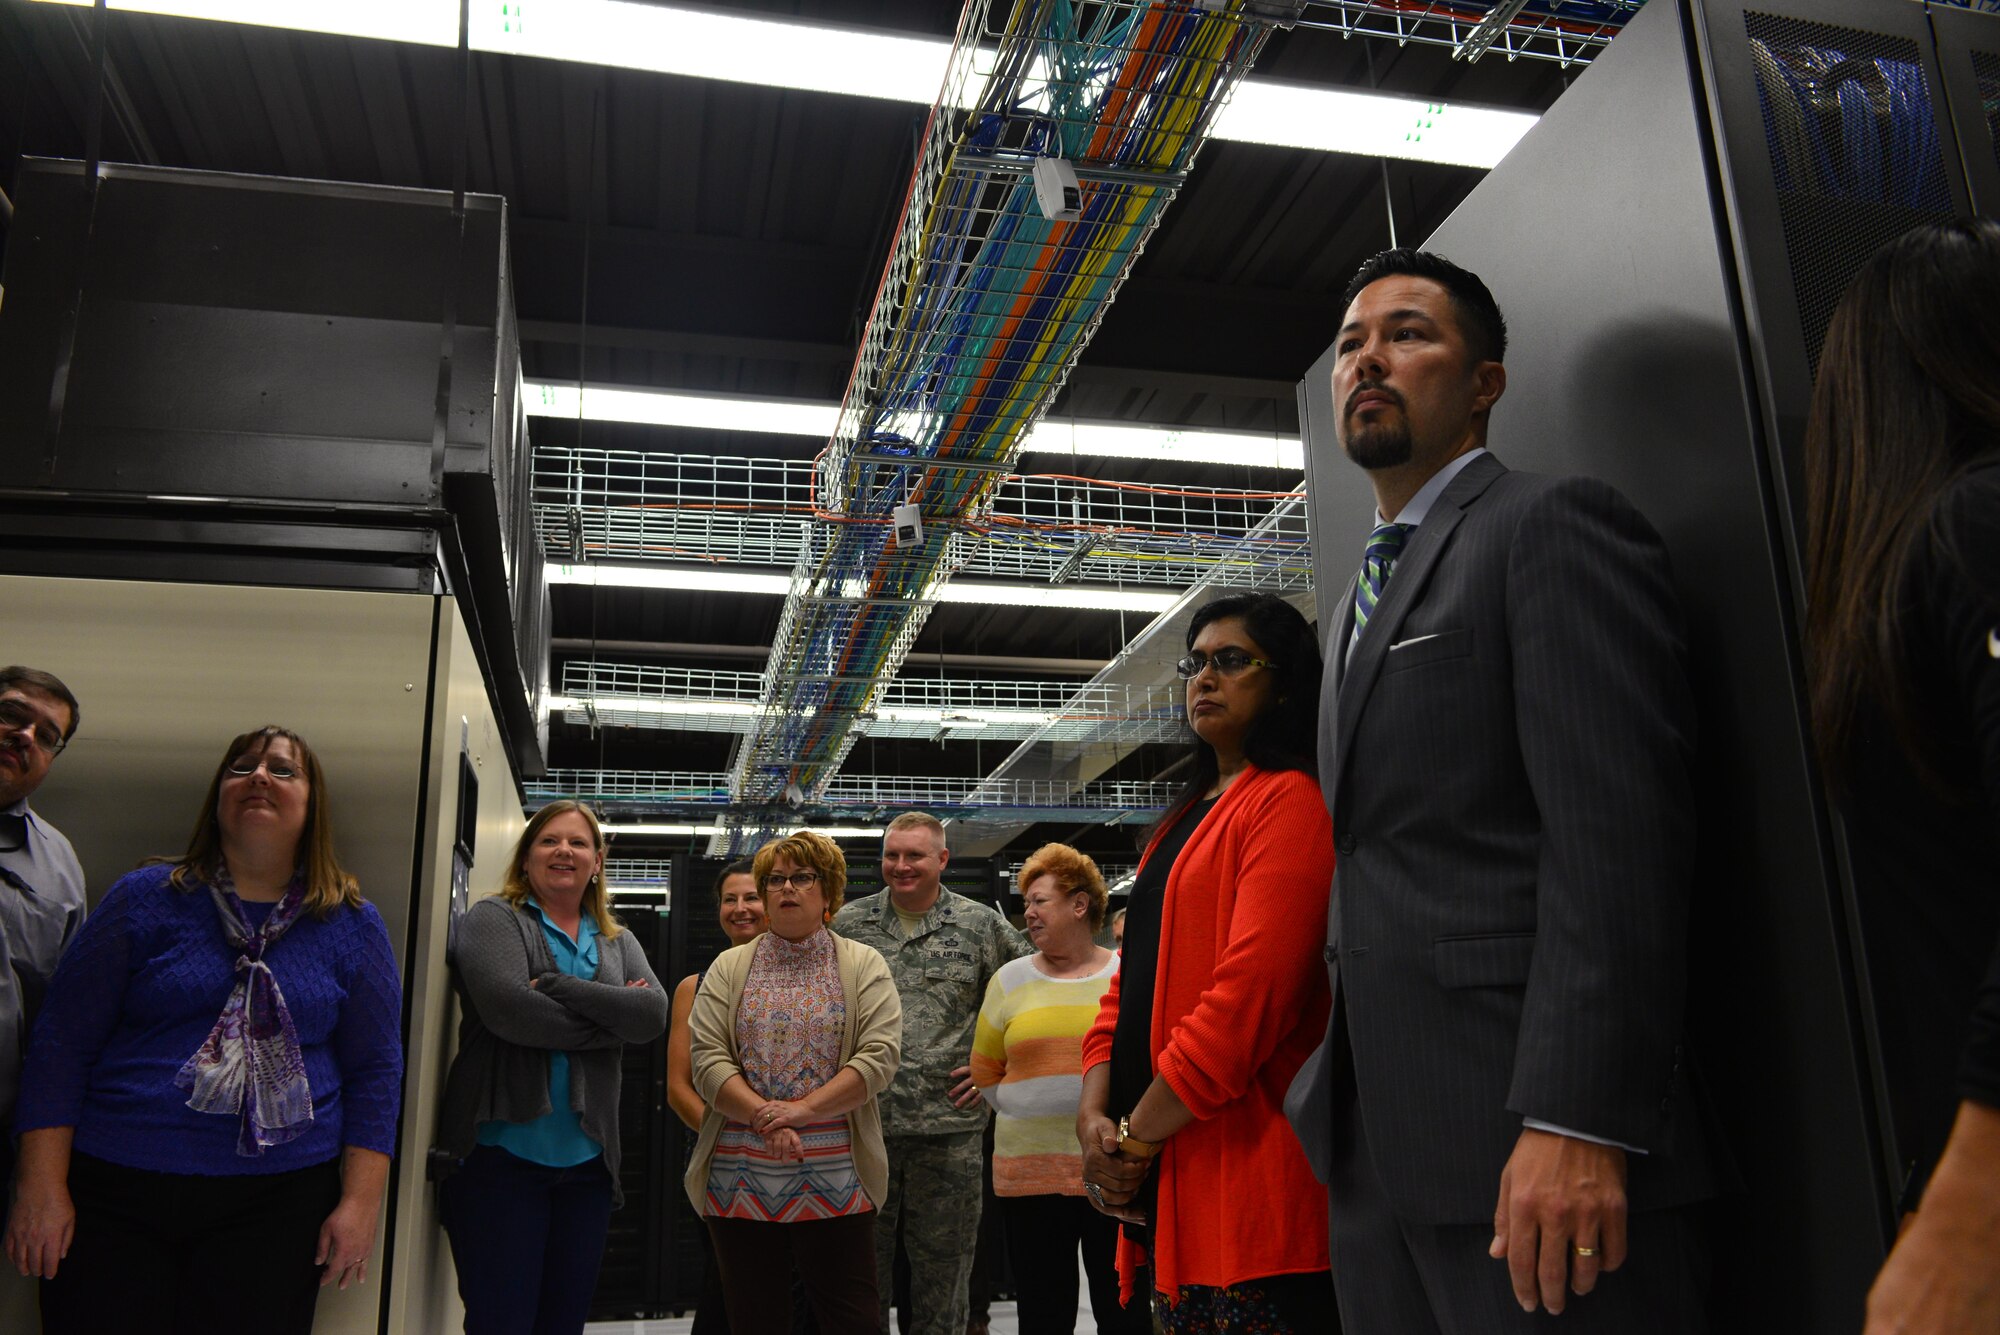 Service members and spouses take a tour of the High-Performance Computing Center in the 557th Weather Wing at Offutt Air Force Base, Neb., during the Spouses Town Hall Nov. 1, 2016. The town hall, which included briefings on the Key Spouses program, a meet and greet with wing leadership and a tour of the 557th WW facilities, gave spouses a greater understanding of the 557th WW mission. (U.S. Air Force photo/Senior Airman Rachel Hammes)